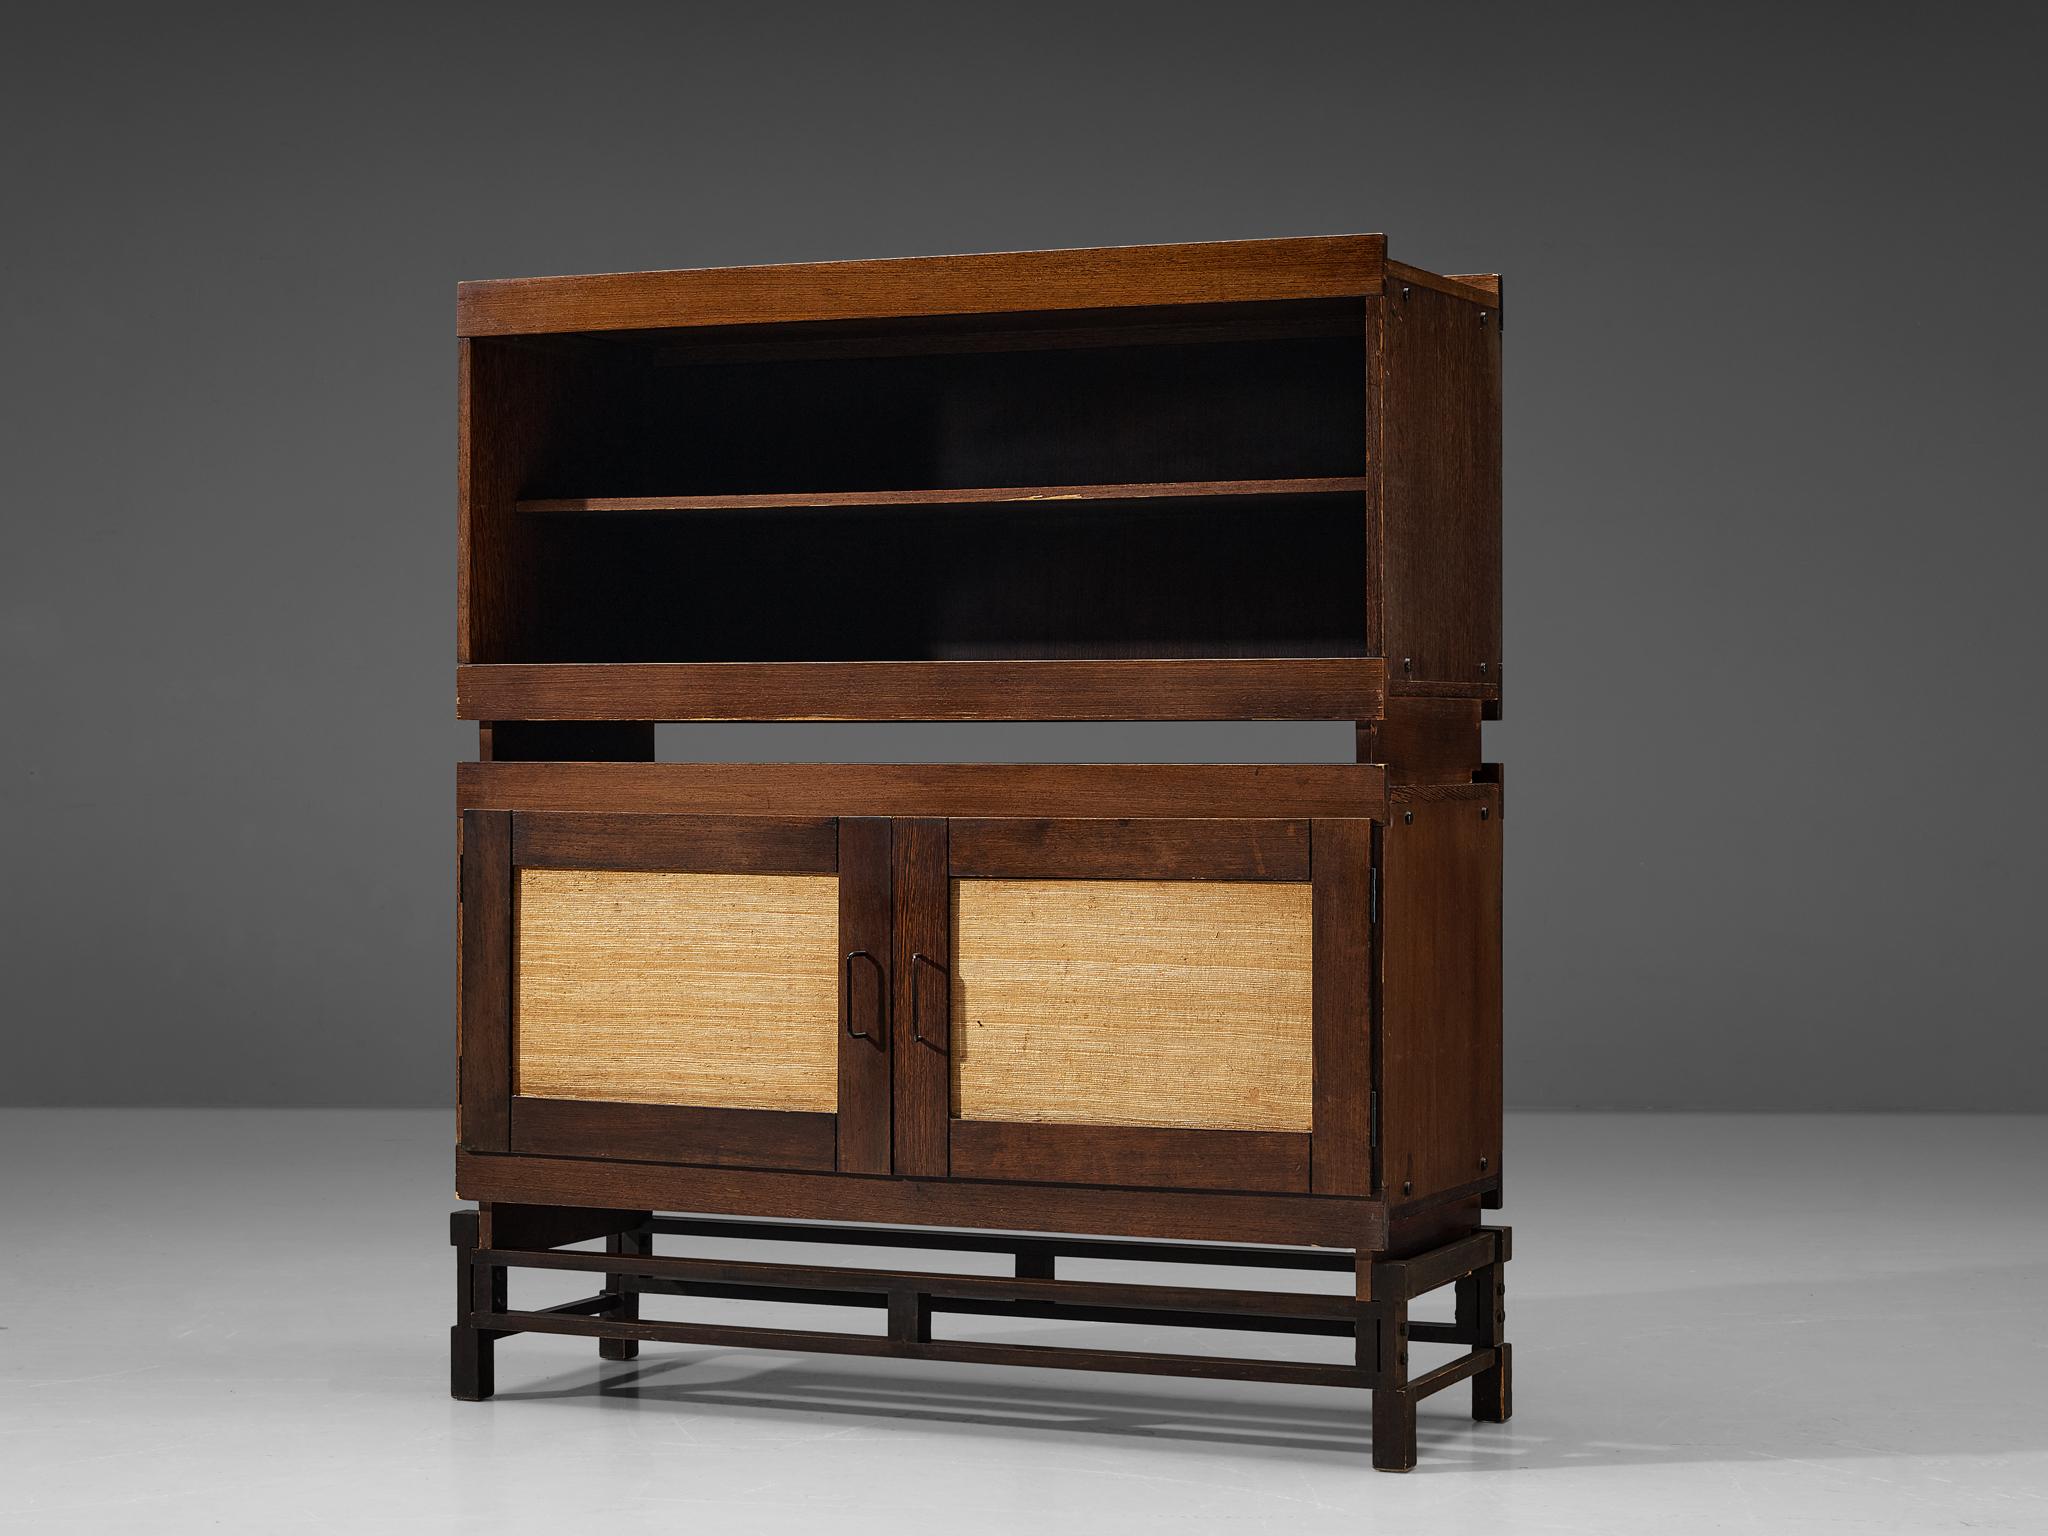 Leonardo Fiori for ISA Bergamo, cabinet, stained oak, seagrass, metal, Italy, 1950s

Beautiful cabinet designed by Leonardo Fiori for ISA Bergamo. The combination of the intense dark stained oak and the refined woven seagrass results in an exotic